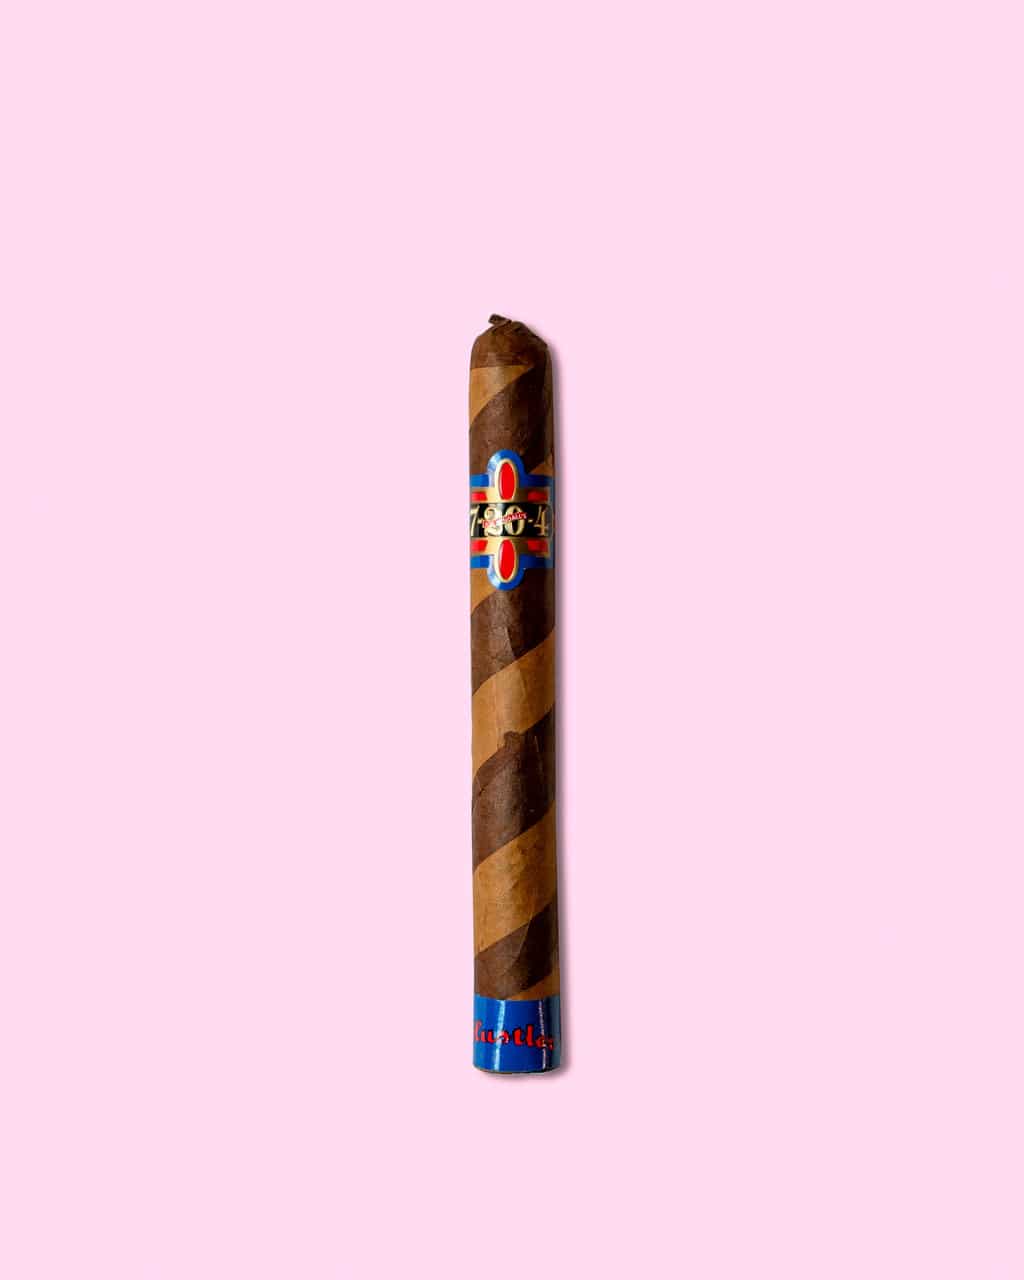 Picture of 7-20-4 Hustler CG Cigar in the UHC Pink background